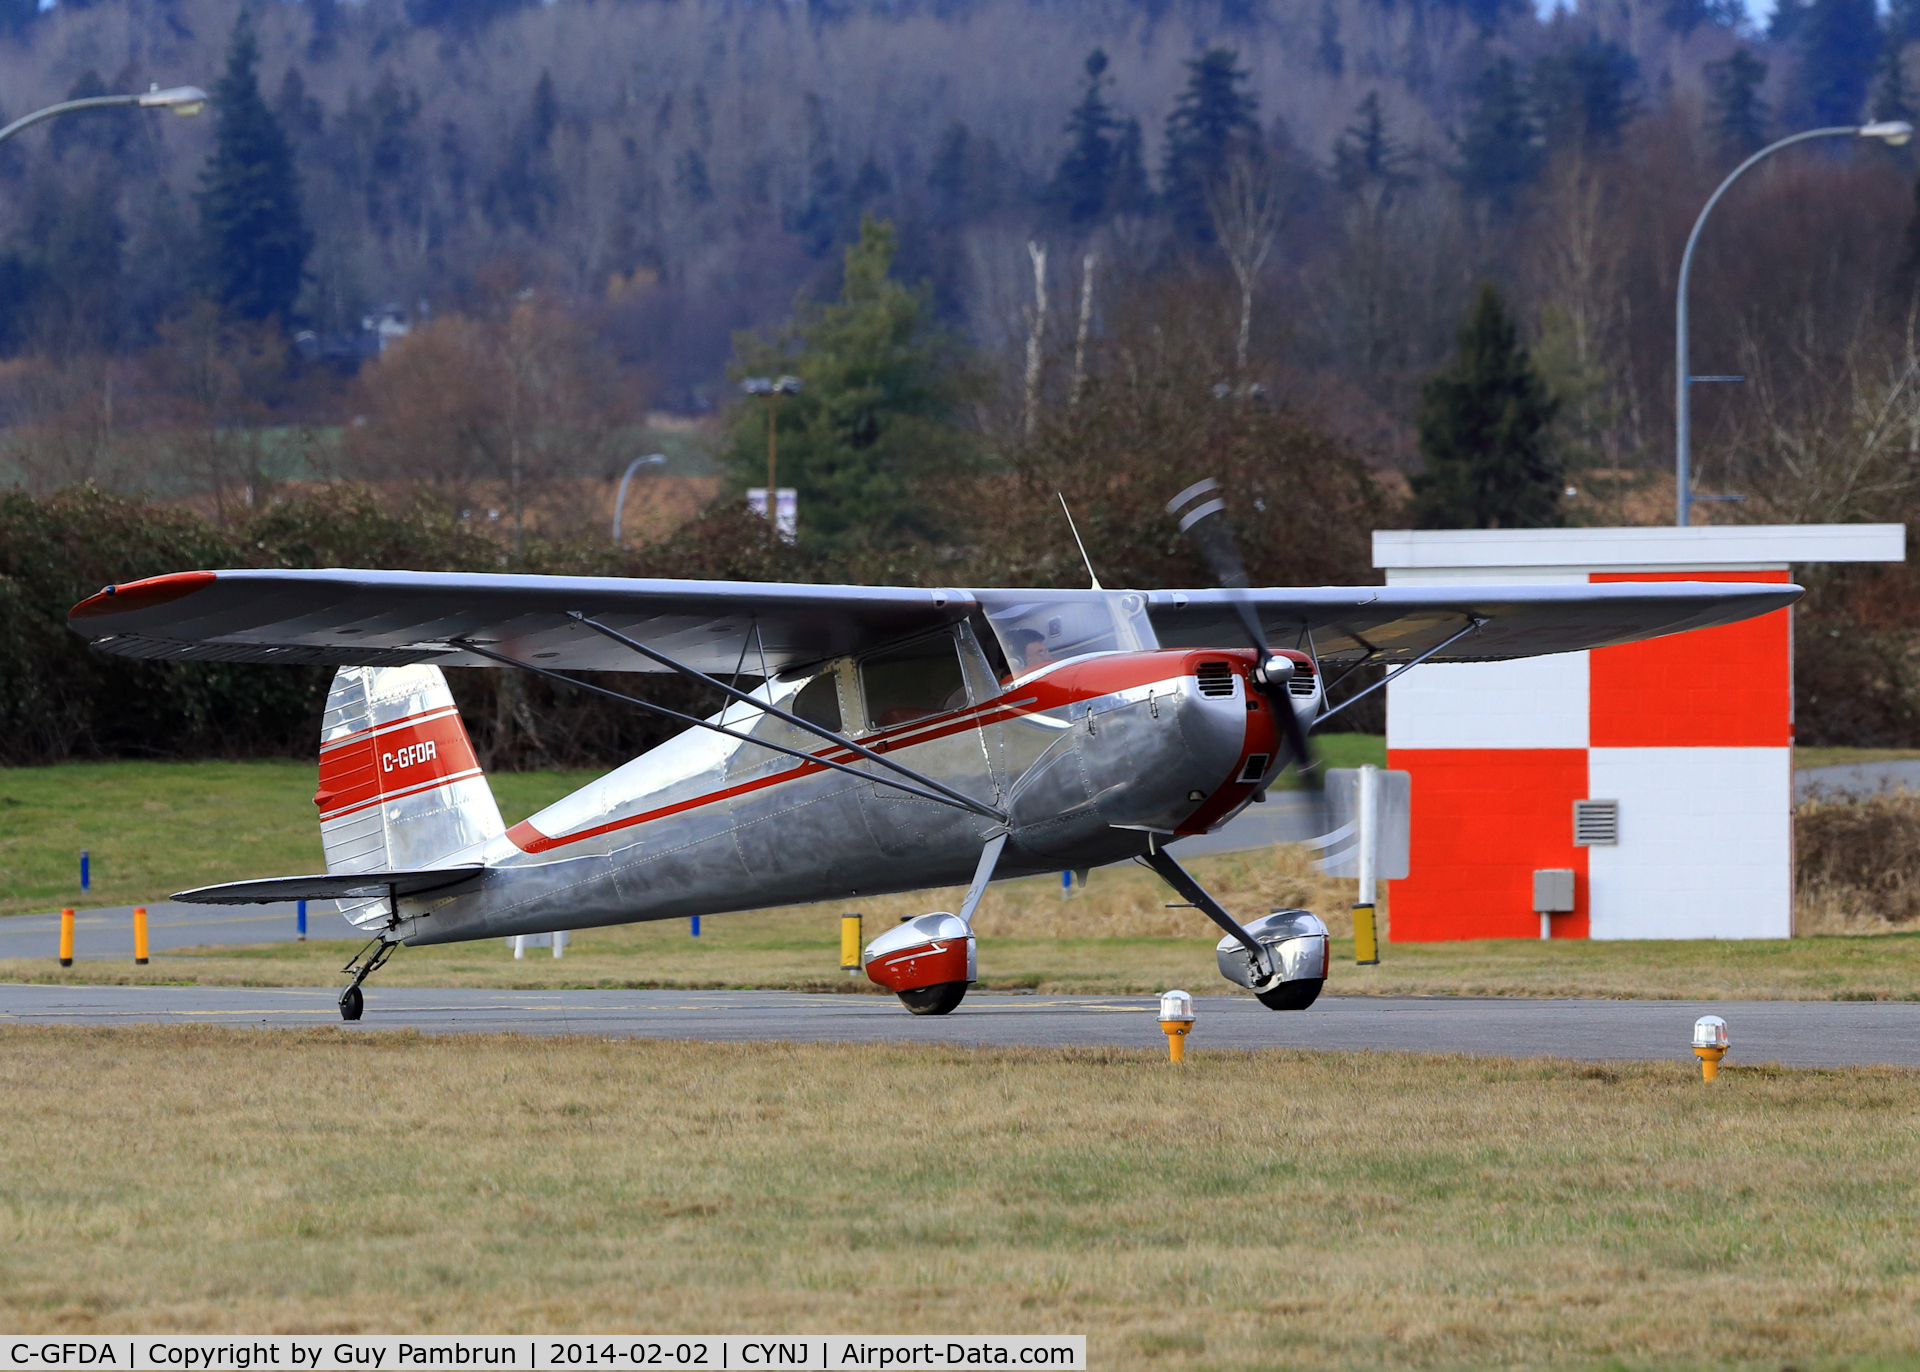 C-GFDA, 1947 Cessna 120 C/N 14309, Ready to take off